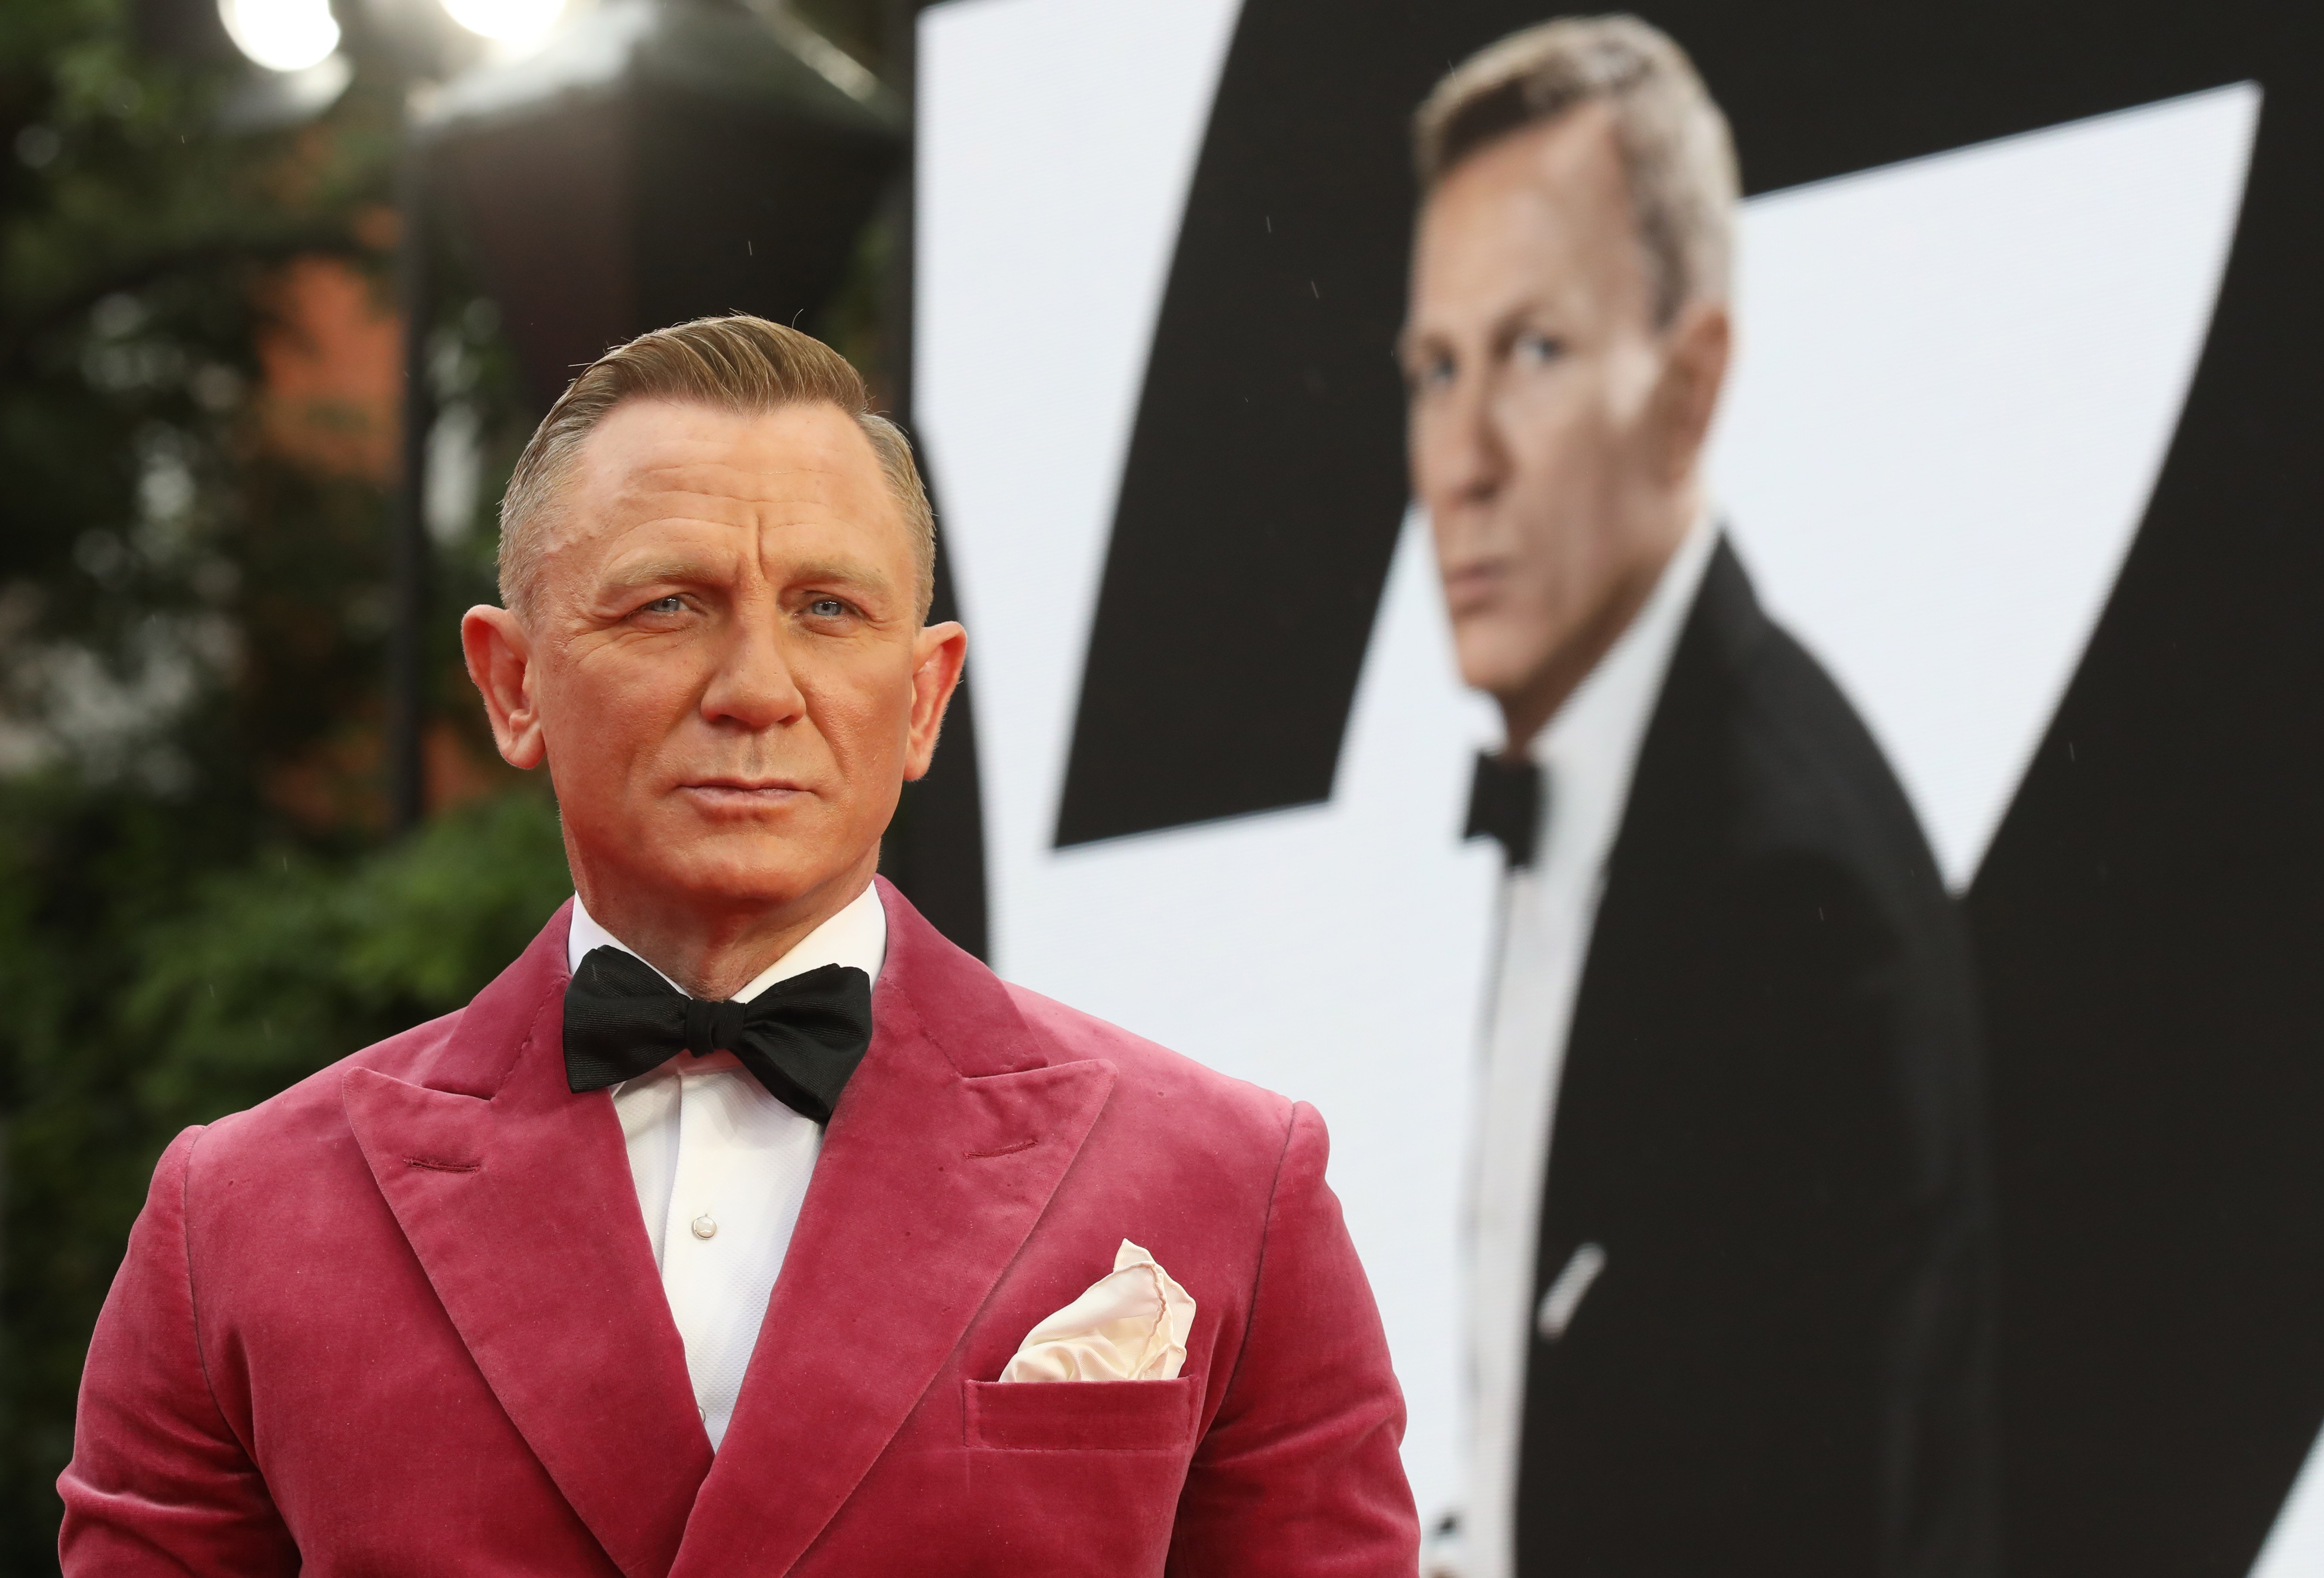 James Bond actor Daniel Craig attends the premiere of No Time to Die